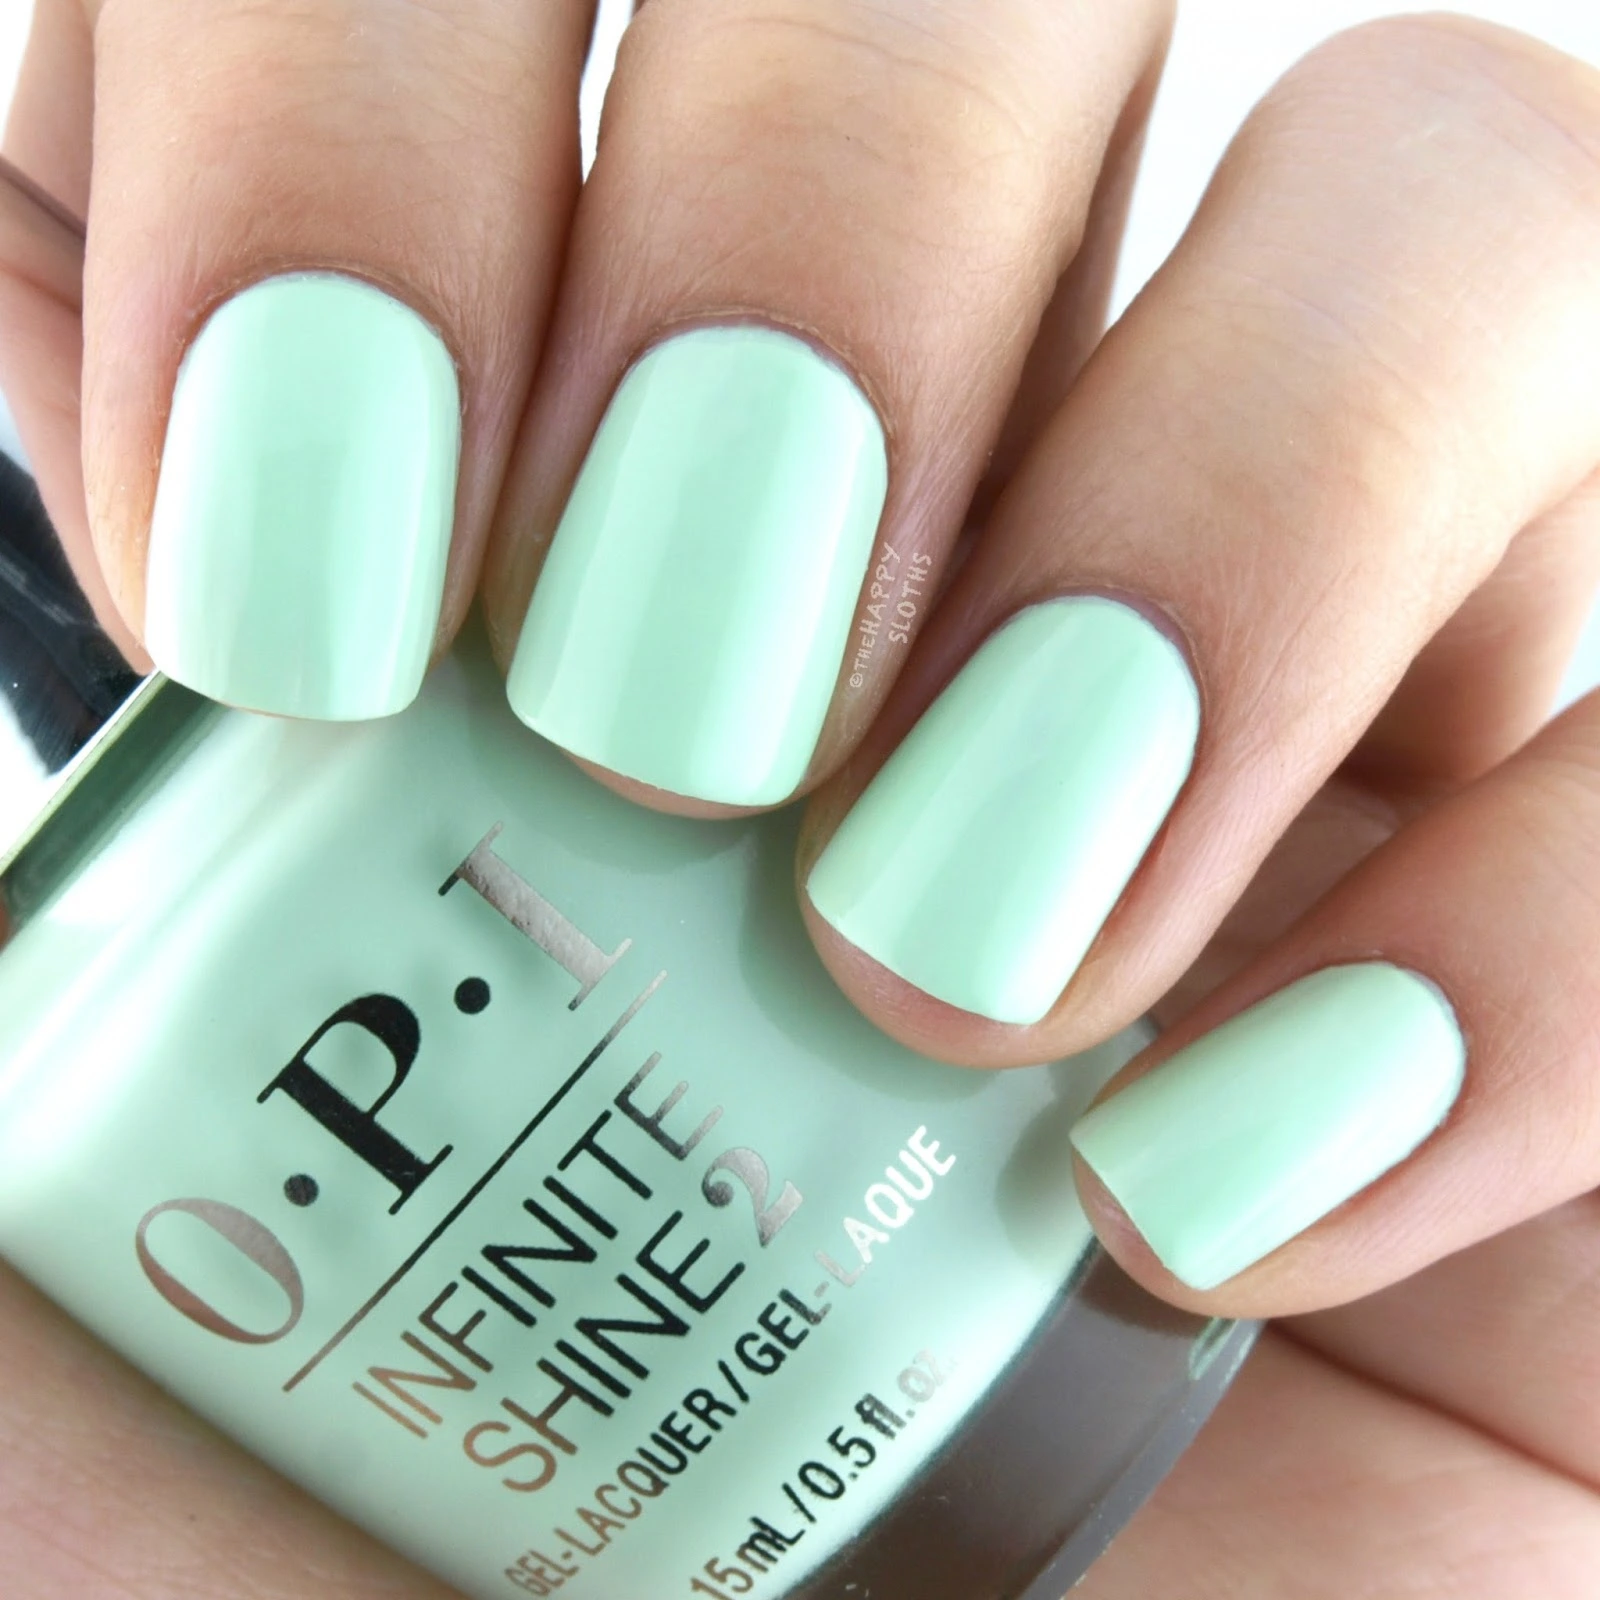 March nail color mint green: That’s Hula-rious nail color by OPI